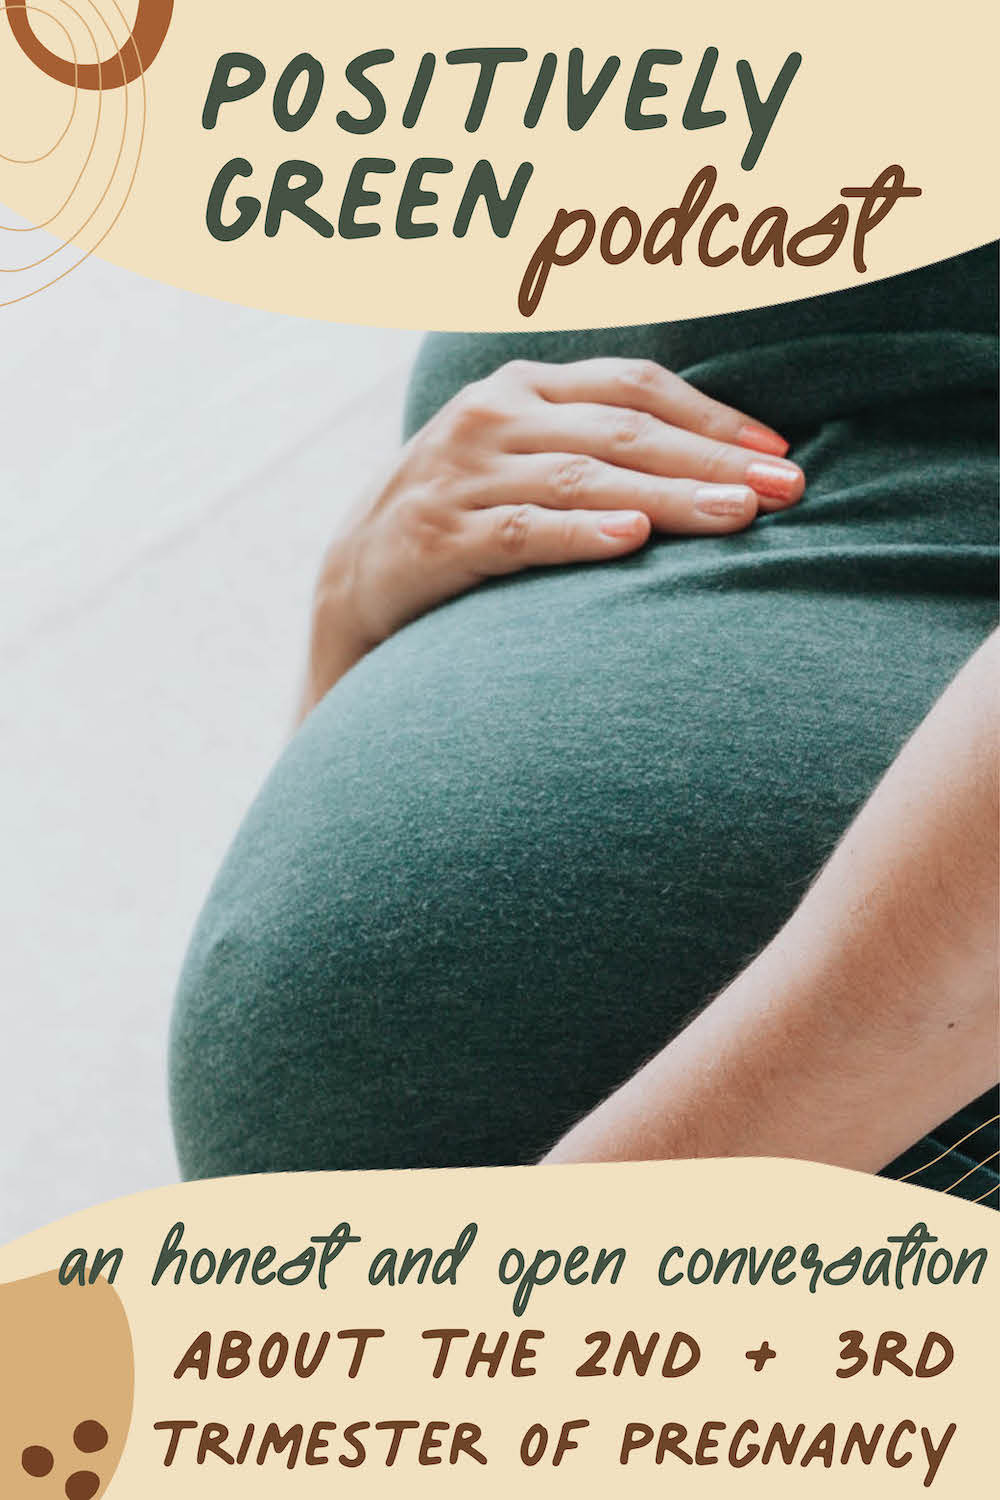 Everything you need to know for your 2nd and 3rd trimester of pregnancy and natural solutions